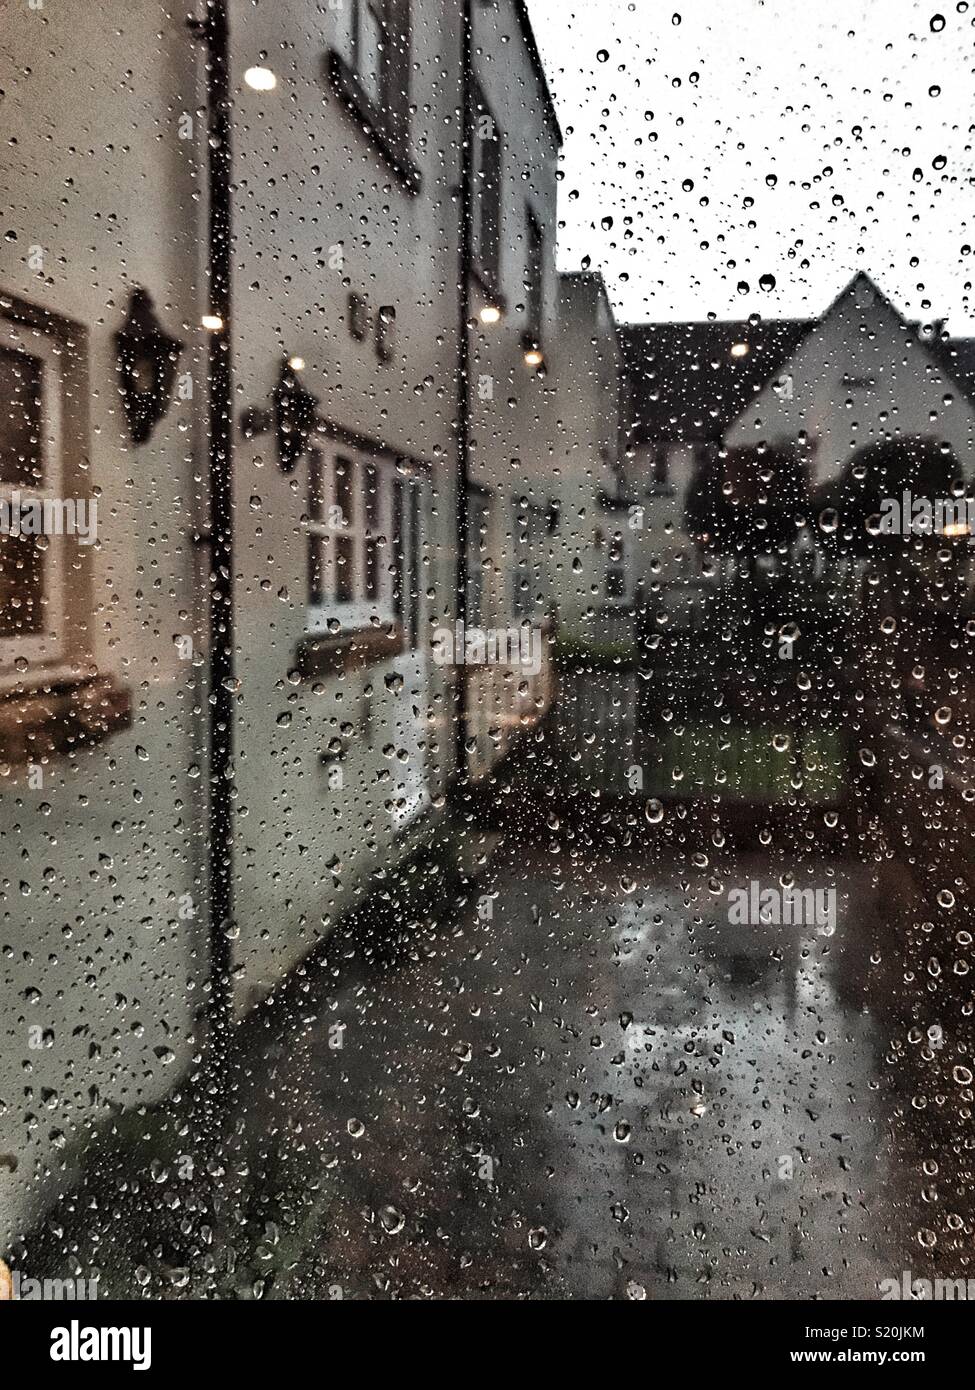 Looking out of a window covered with raindrops, residential area with lights in the early evening Stock Photo